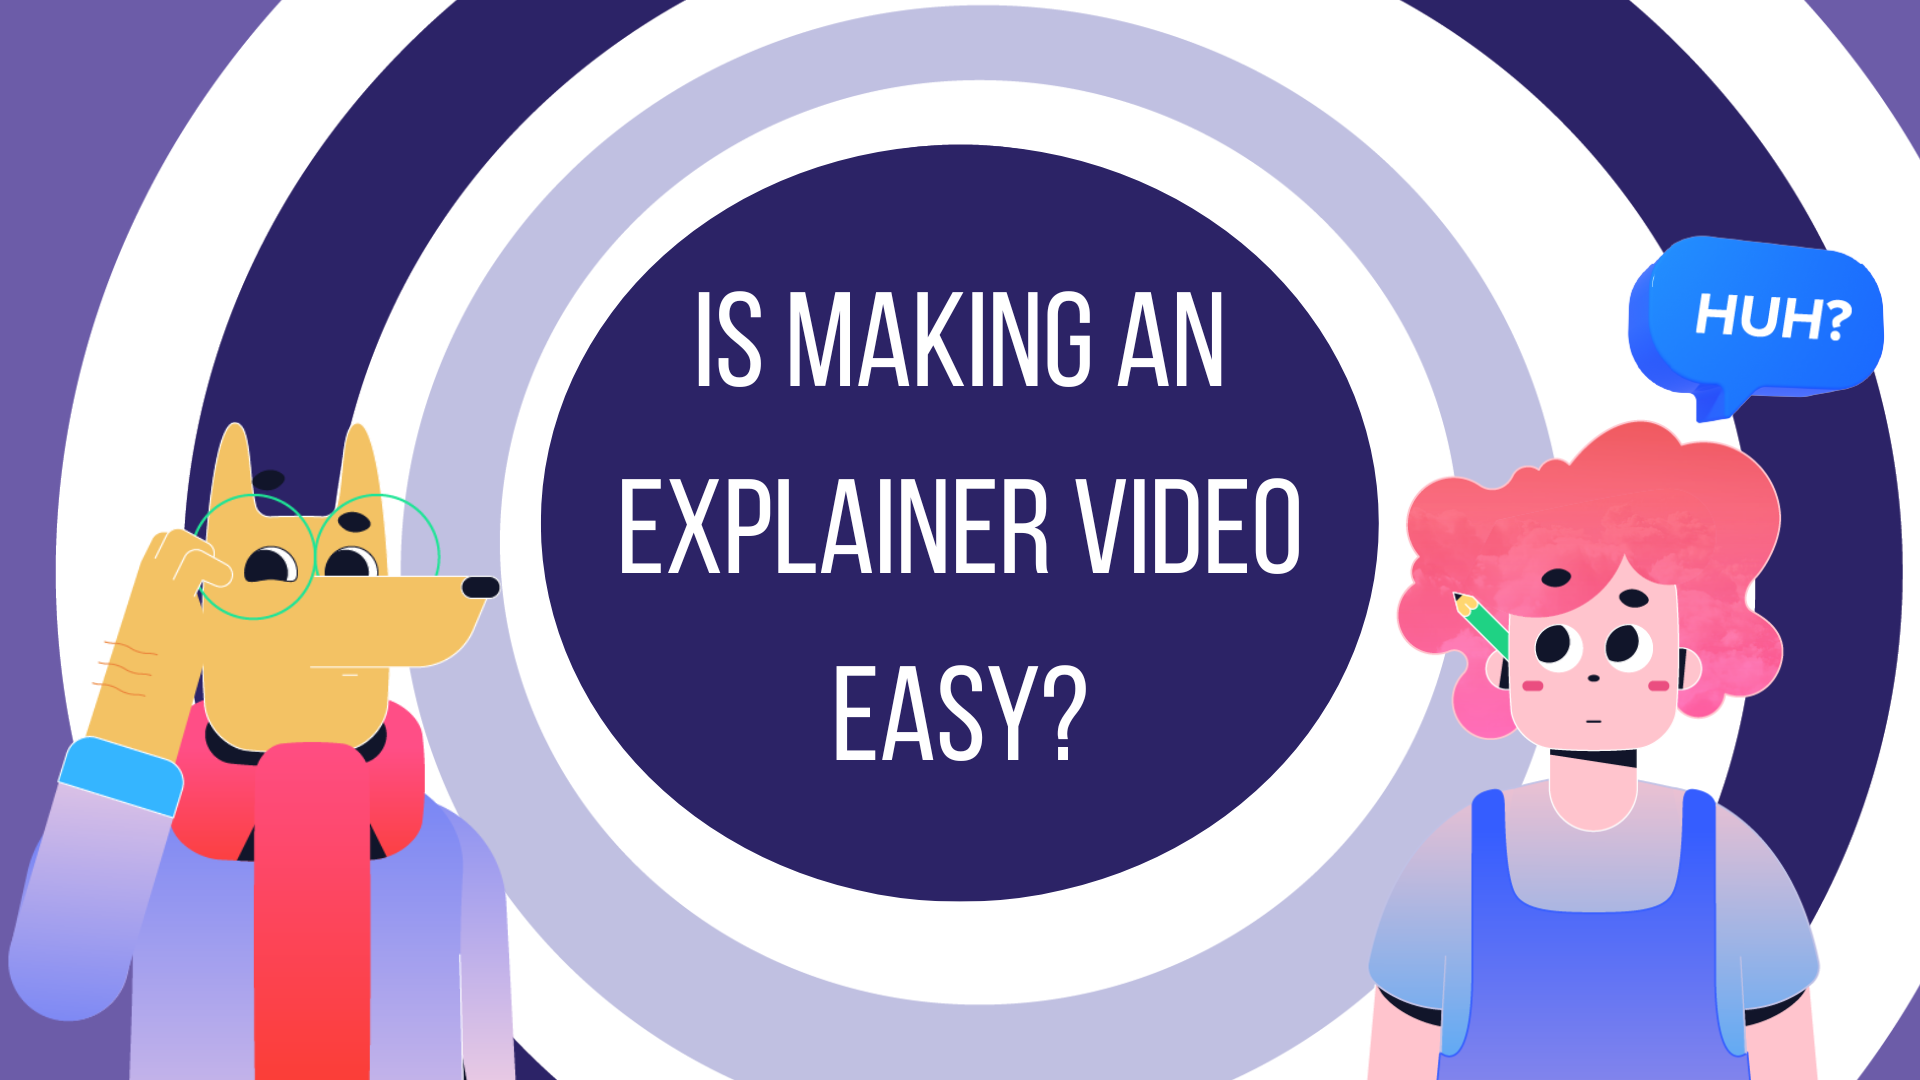 Is making an explainer video easy?